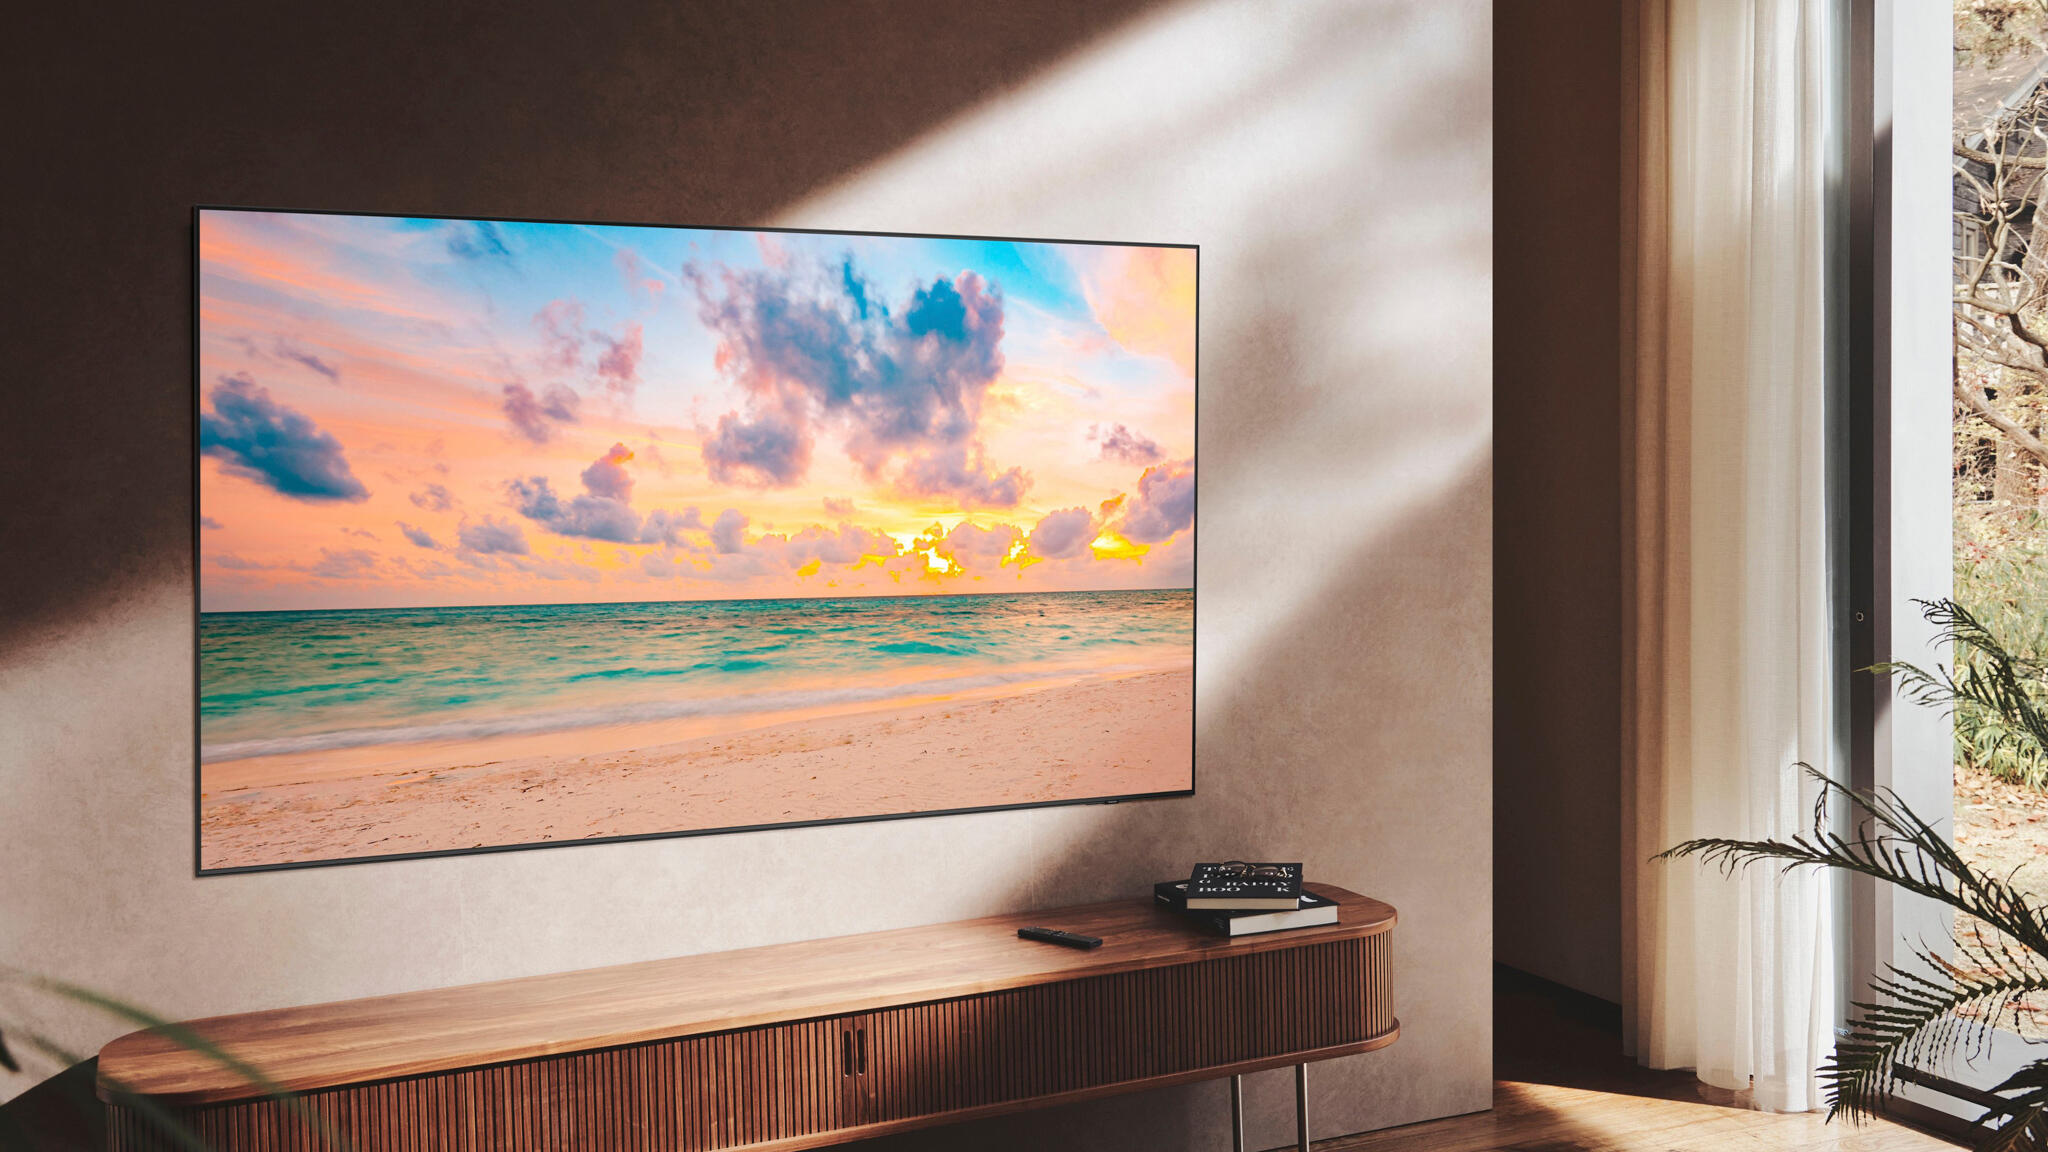 Samsung 65inch QN90B QLED TV review The best TV for brightly lit